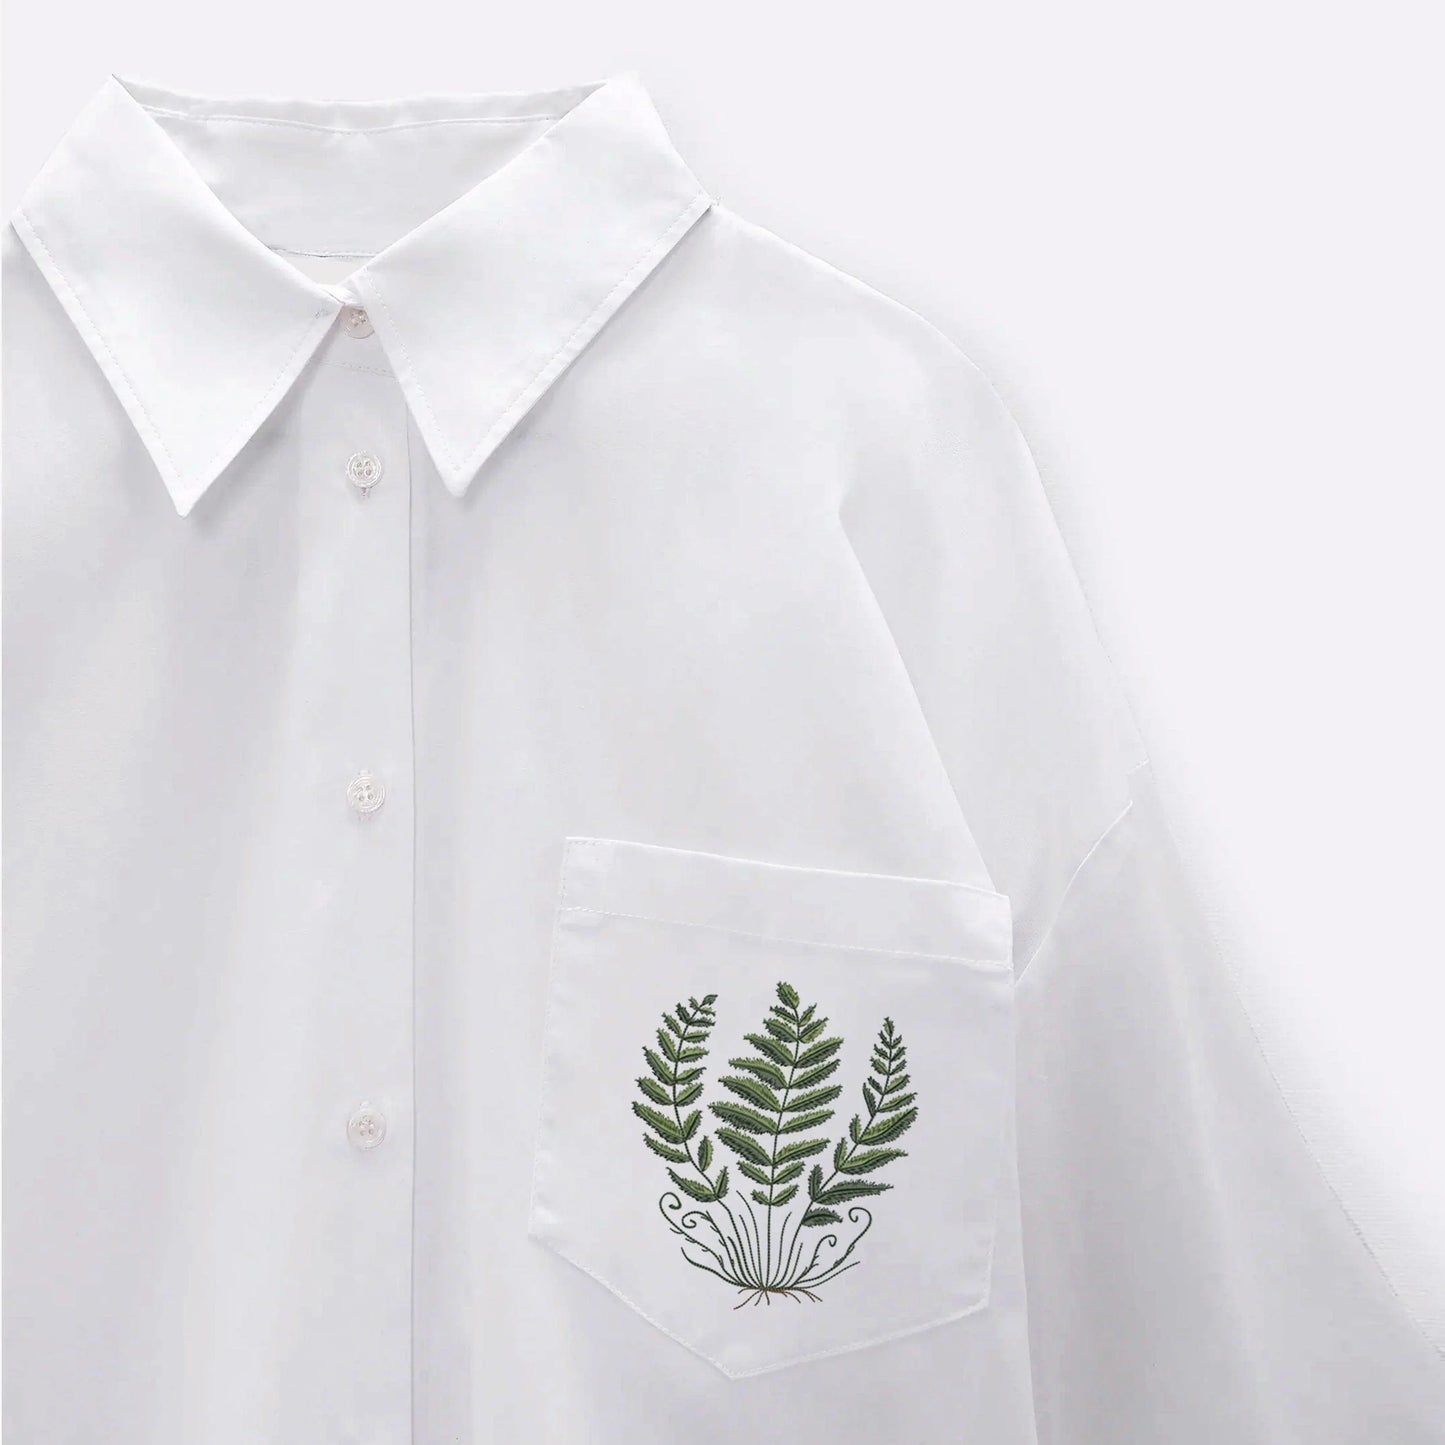 Forest Fern Machine Embroidery Design on white blouse pocket